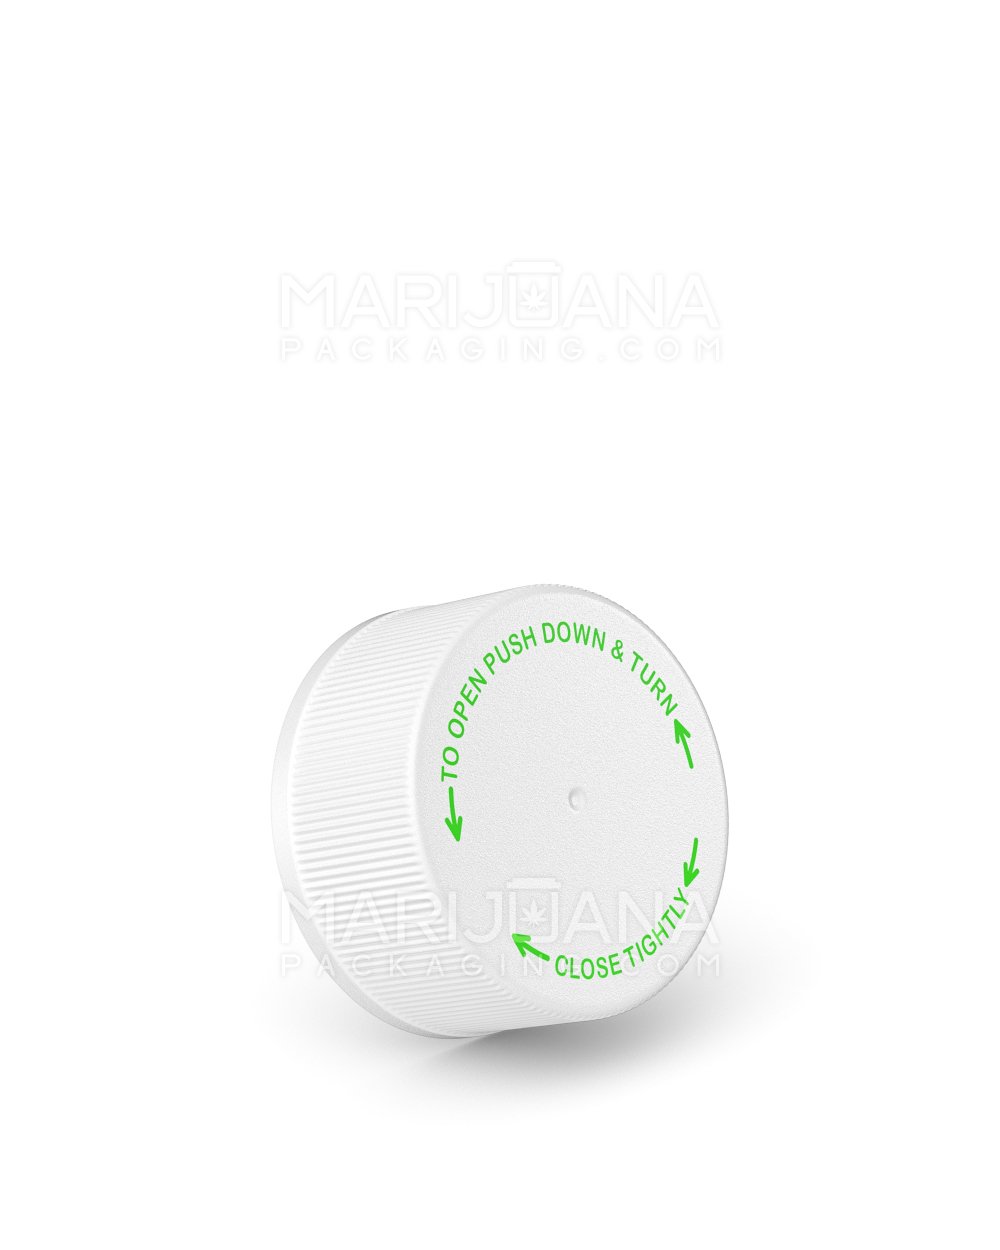 Child Resistant | Ribbed Push Down & Turn Plastic Caps w/ Text & Foam Liner | 28mm - Semi Gloss White - 504 Count - 1